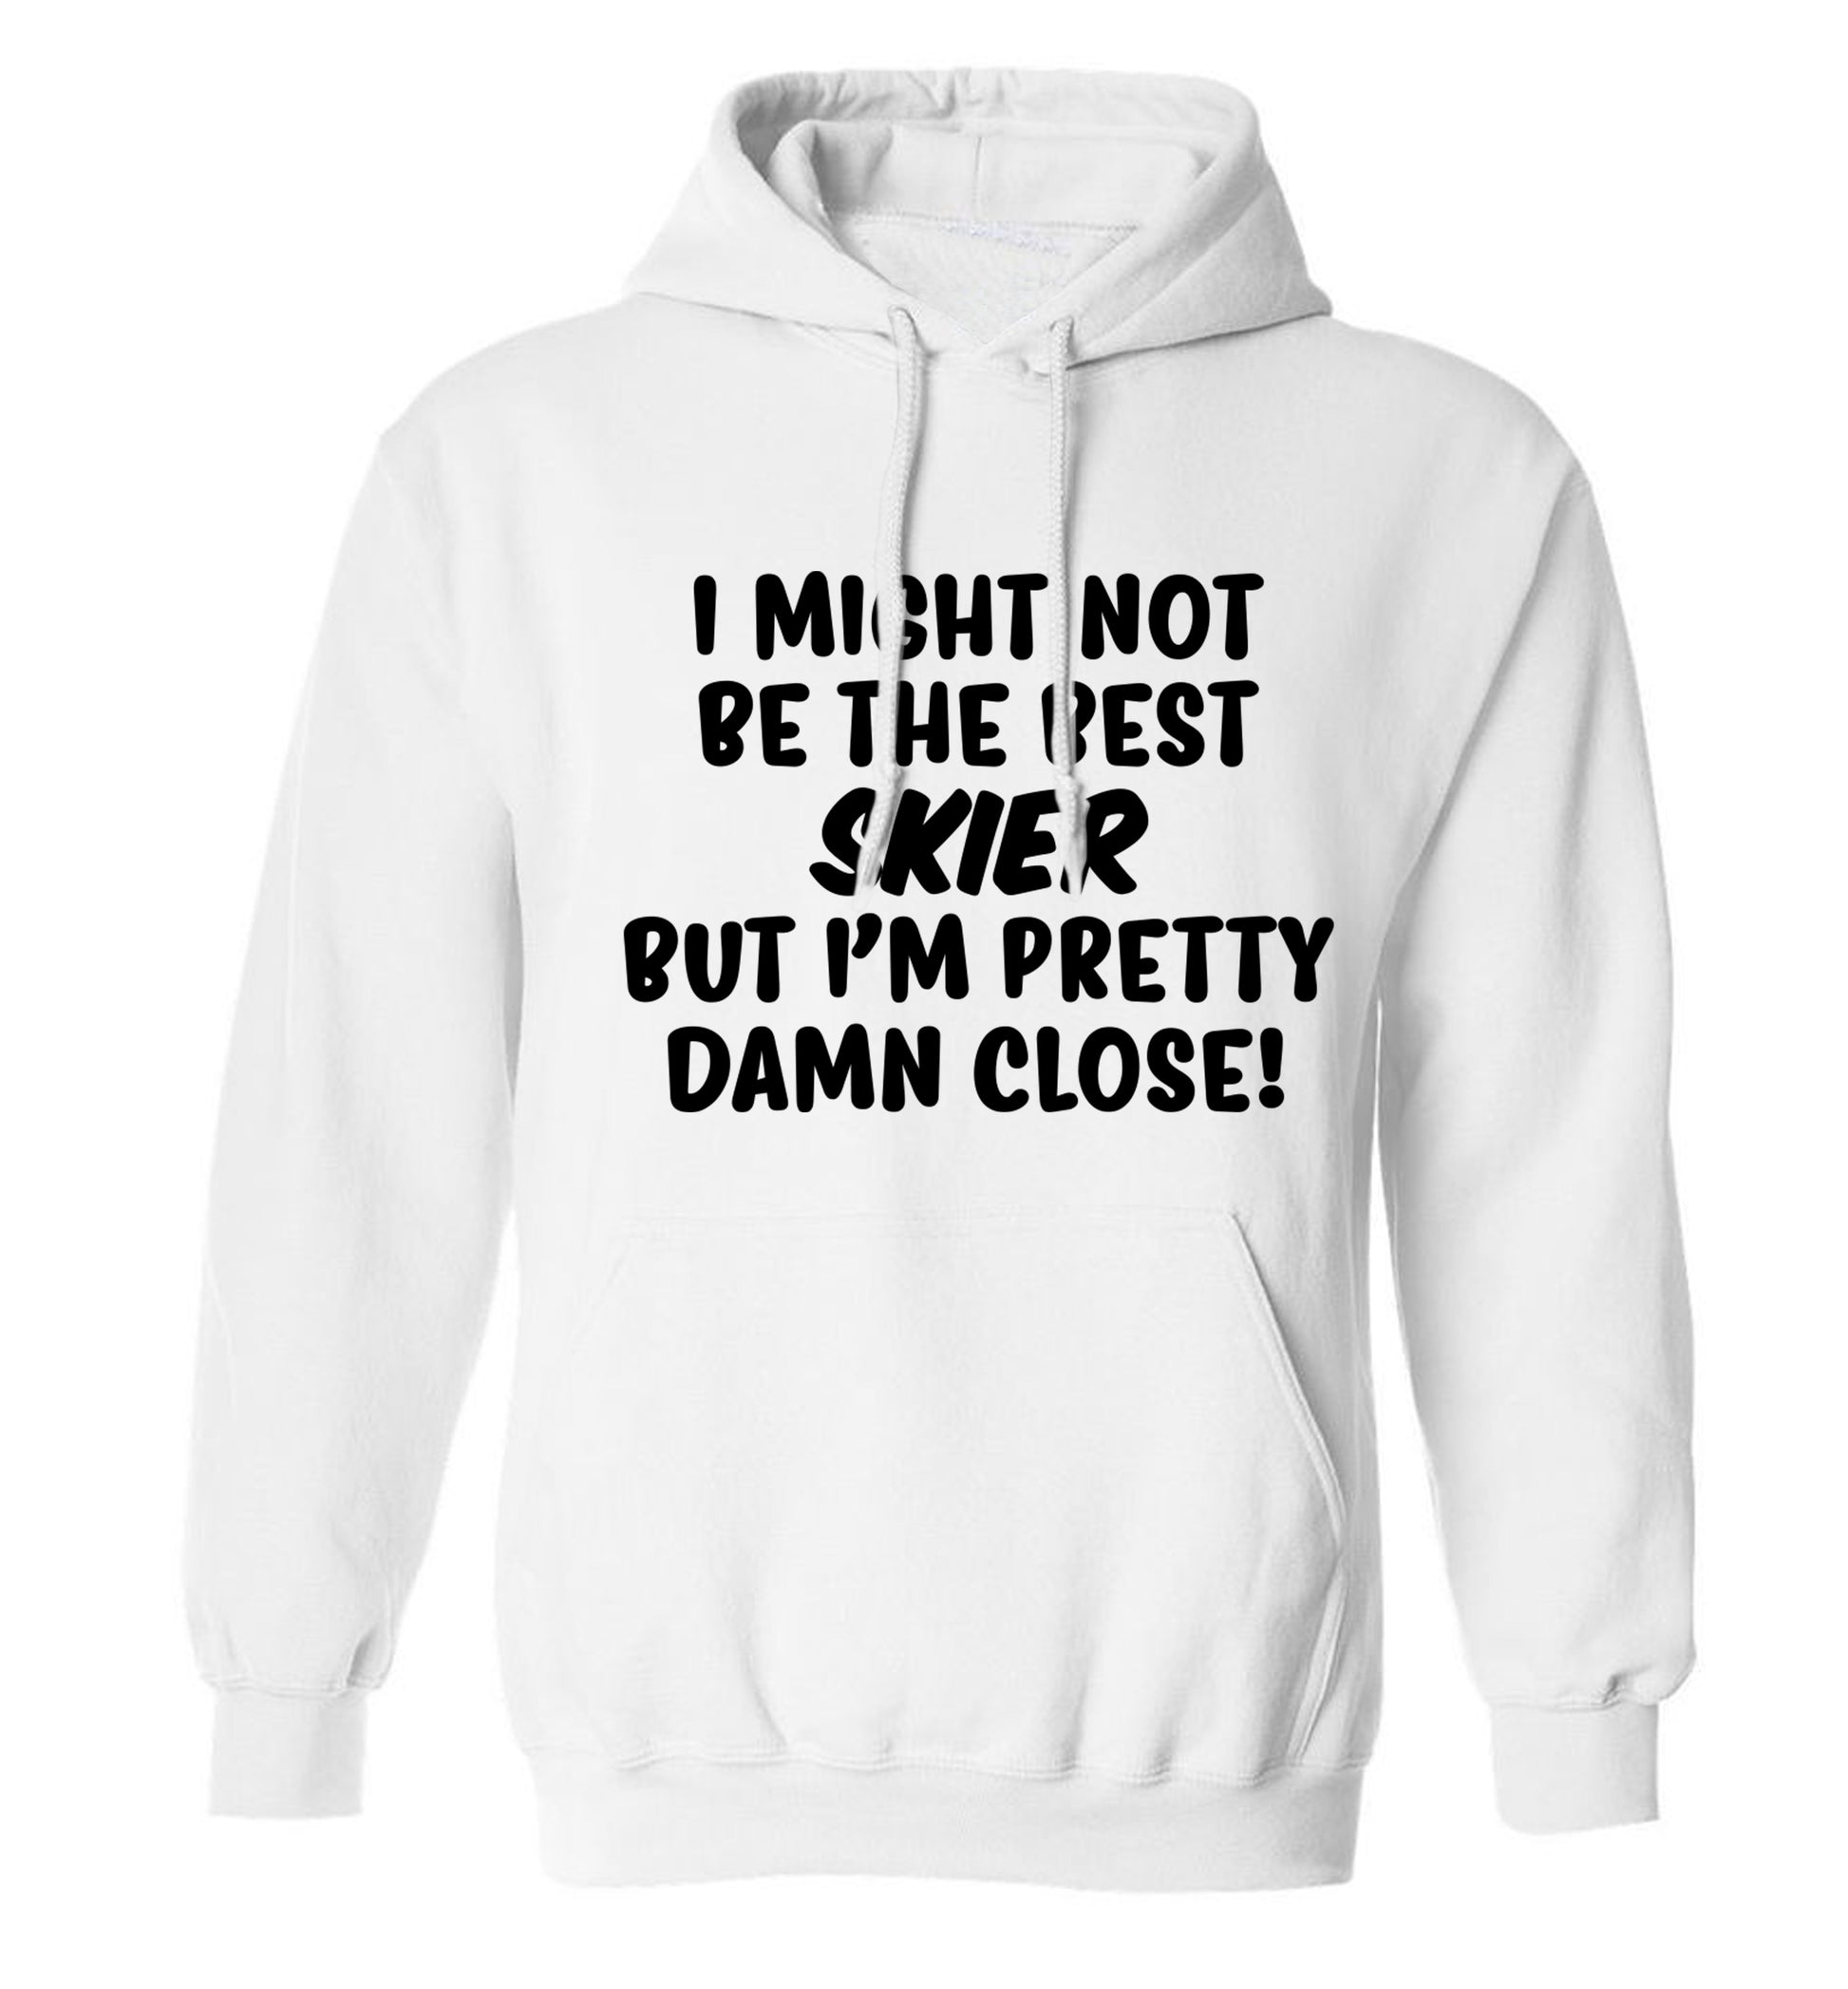 I might not be the best skier but I'm pretty damn close! adults unisexwhite hoodie 2XL